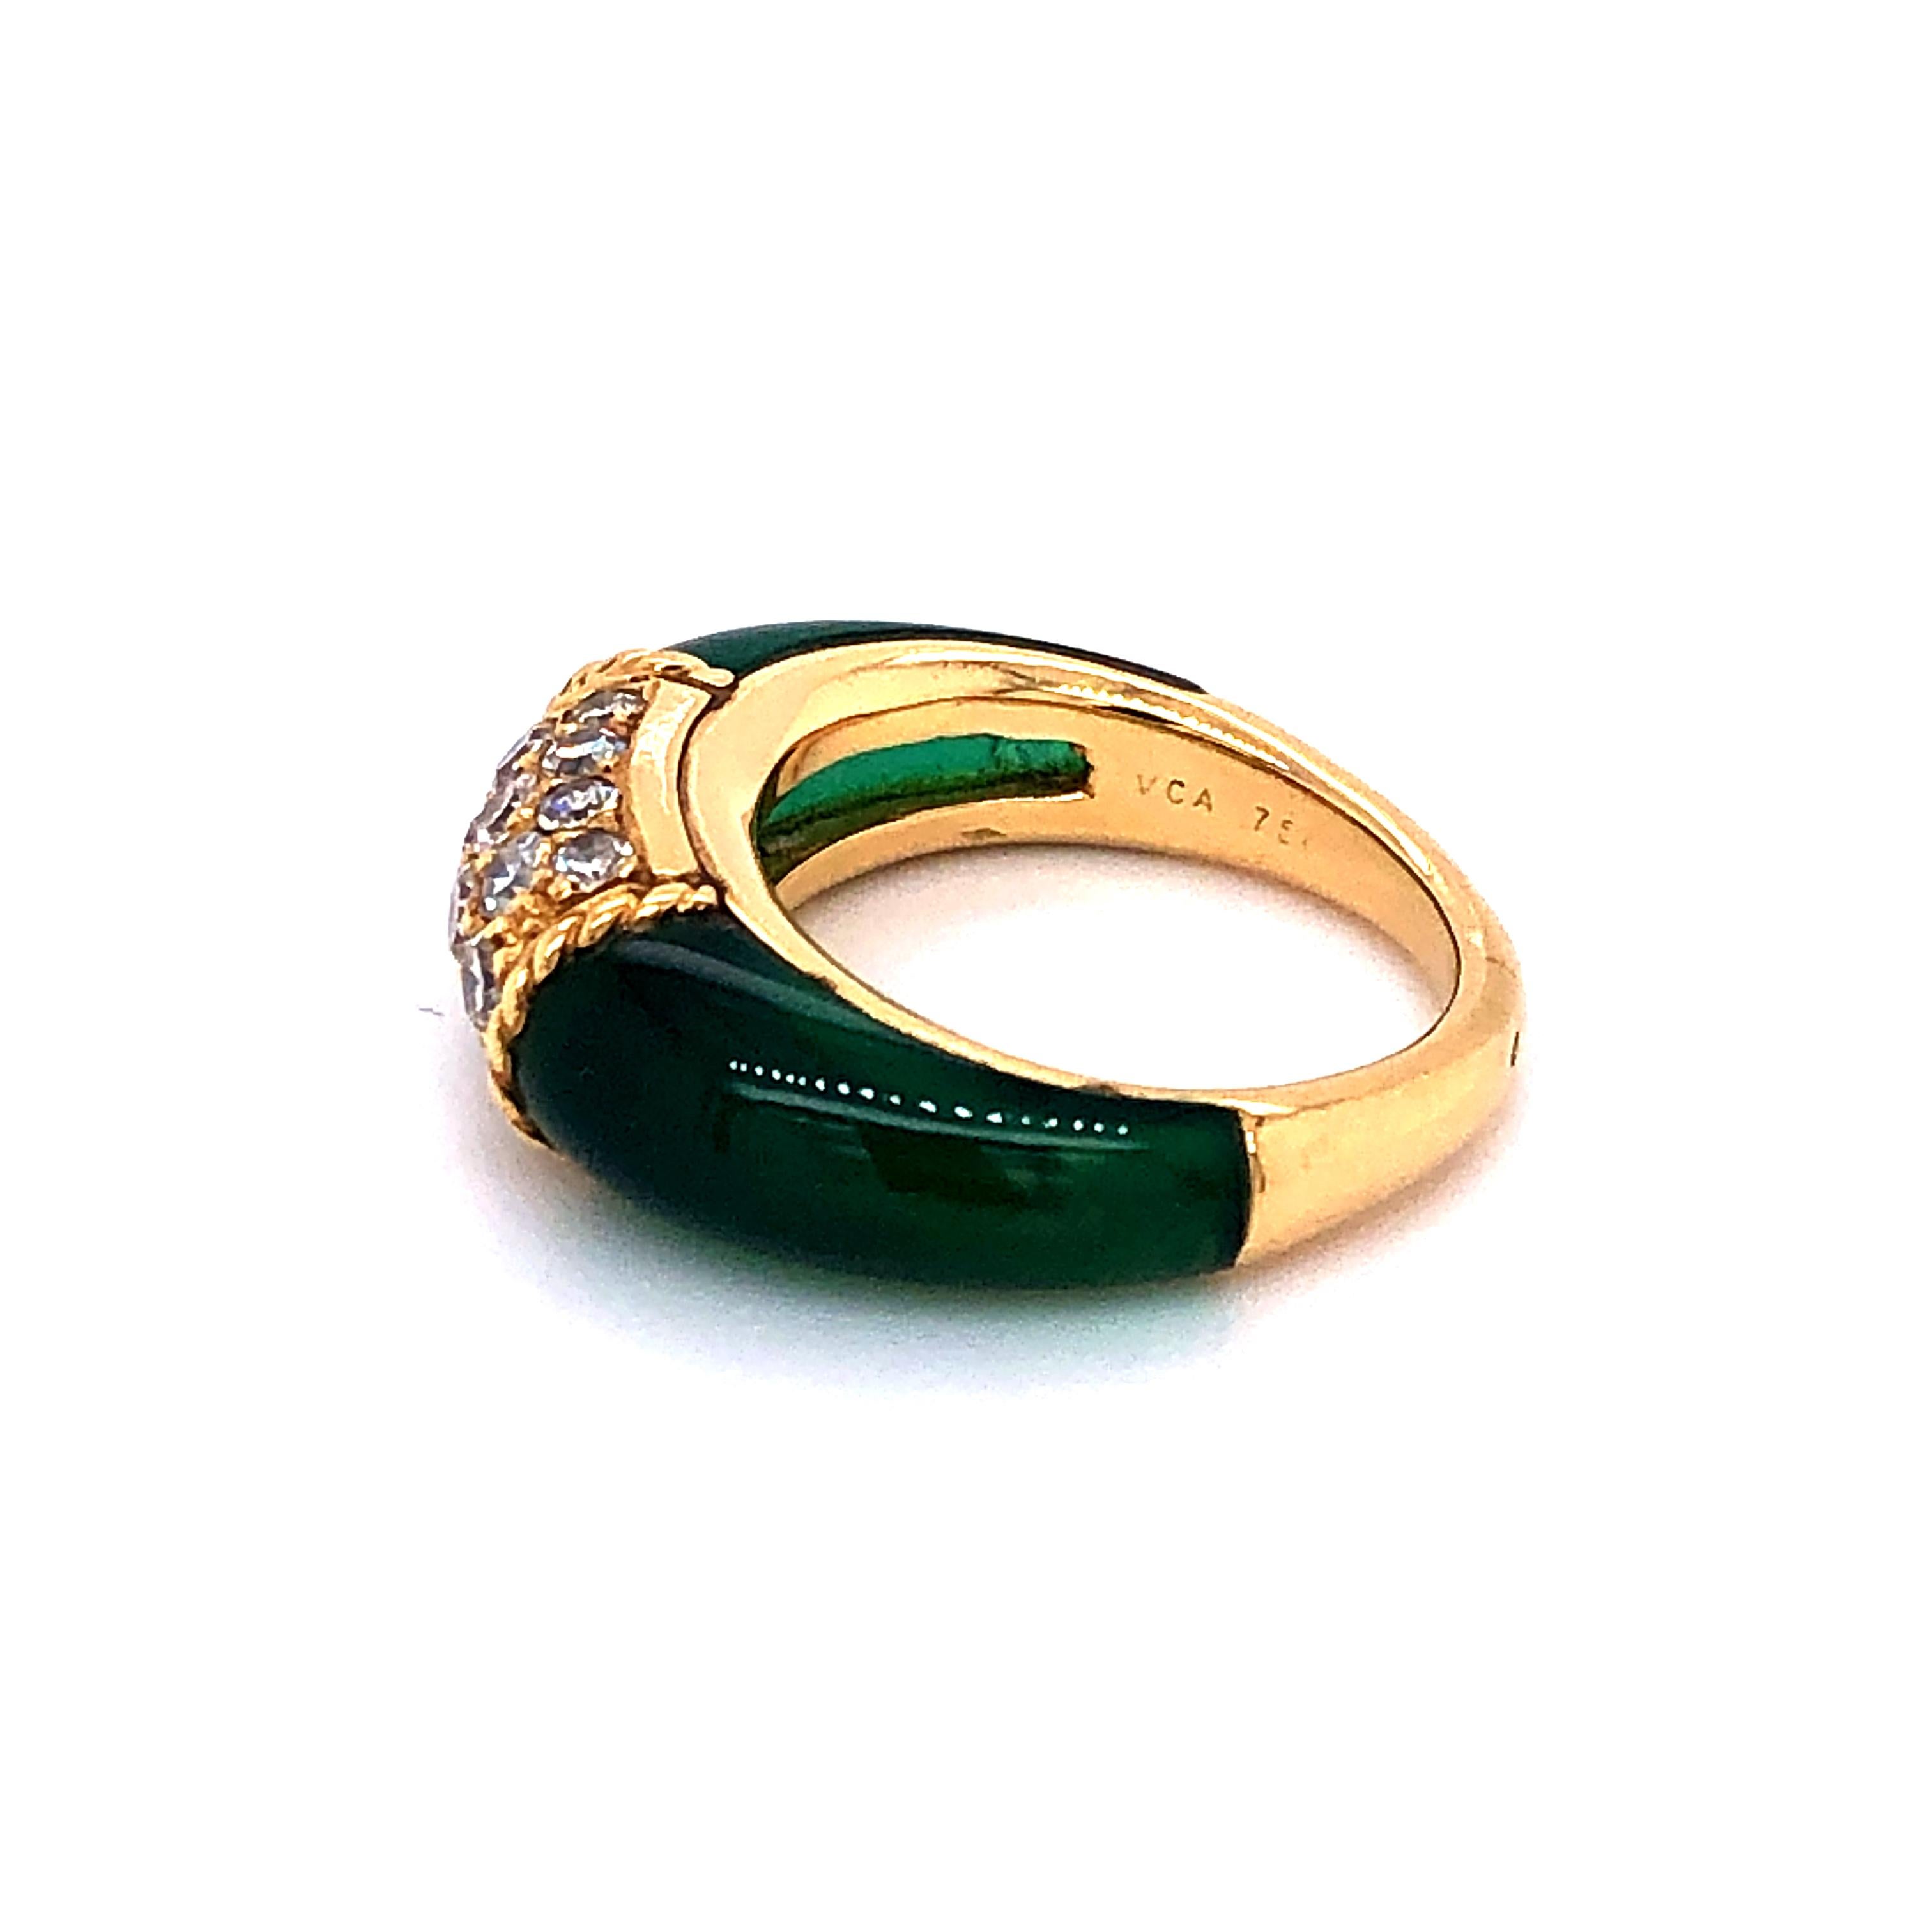 Contemporary Van Cleef & Arpels Stacking Philippine Ring, Chrysoprase, Diamonds, Yellow Gold